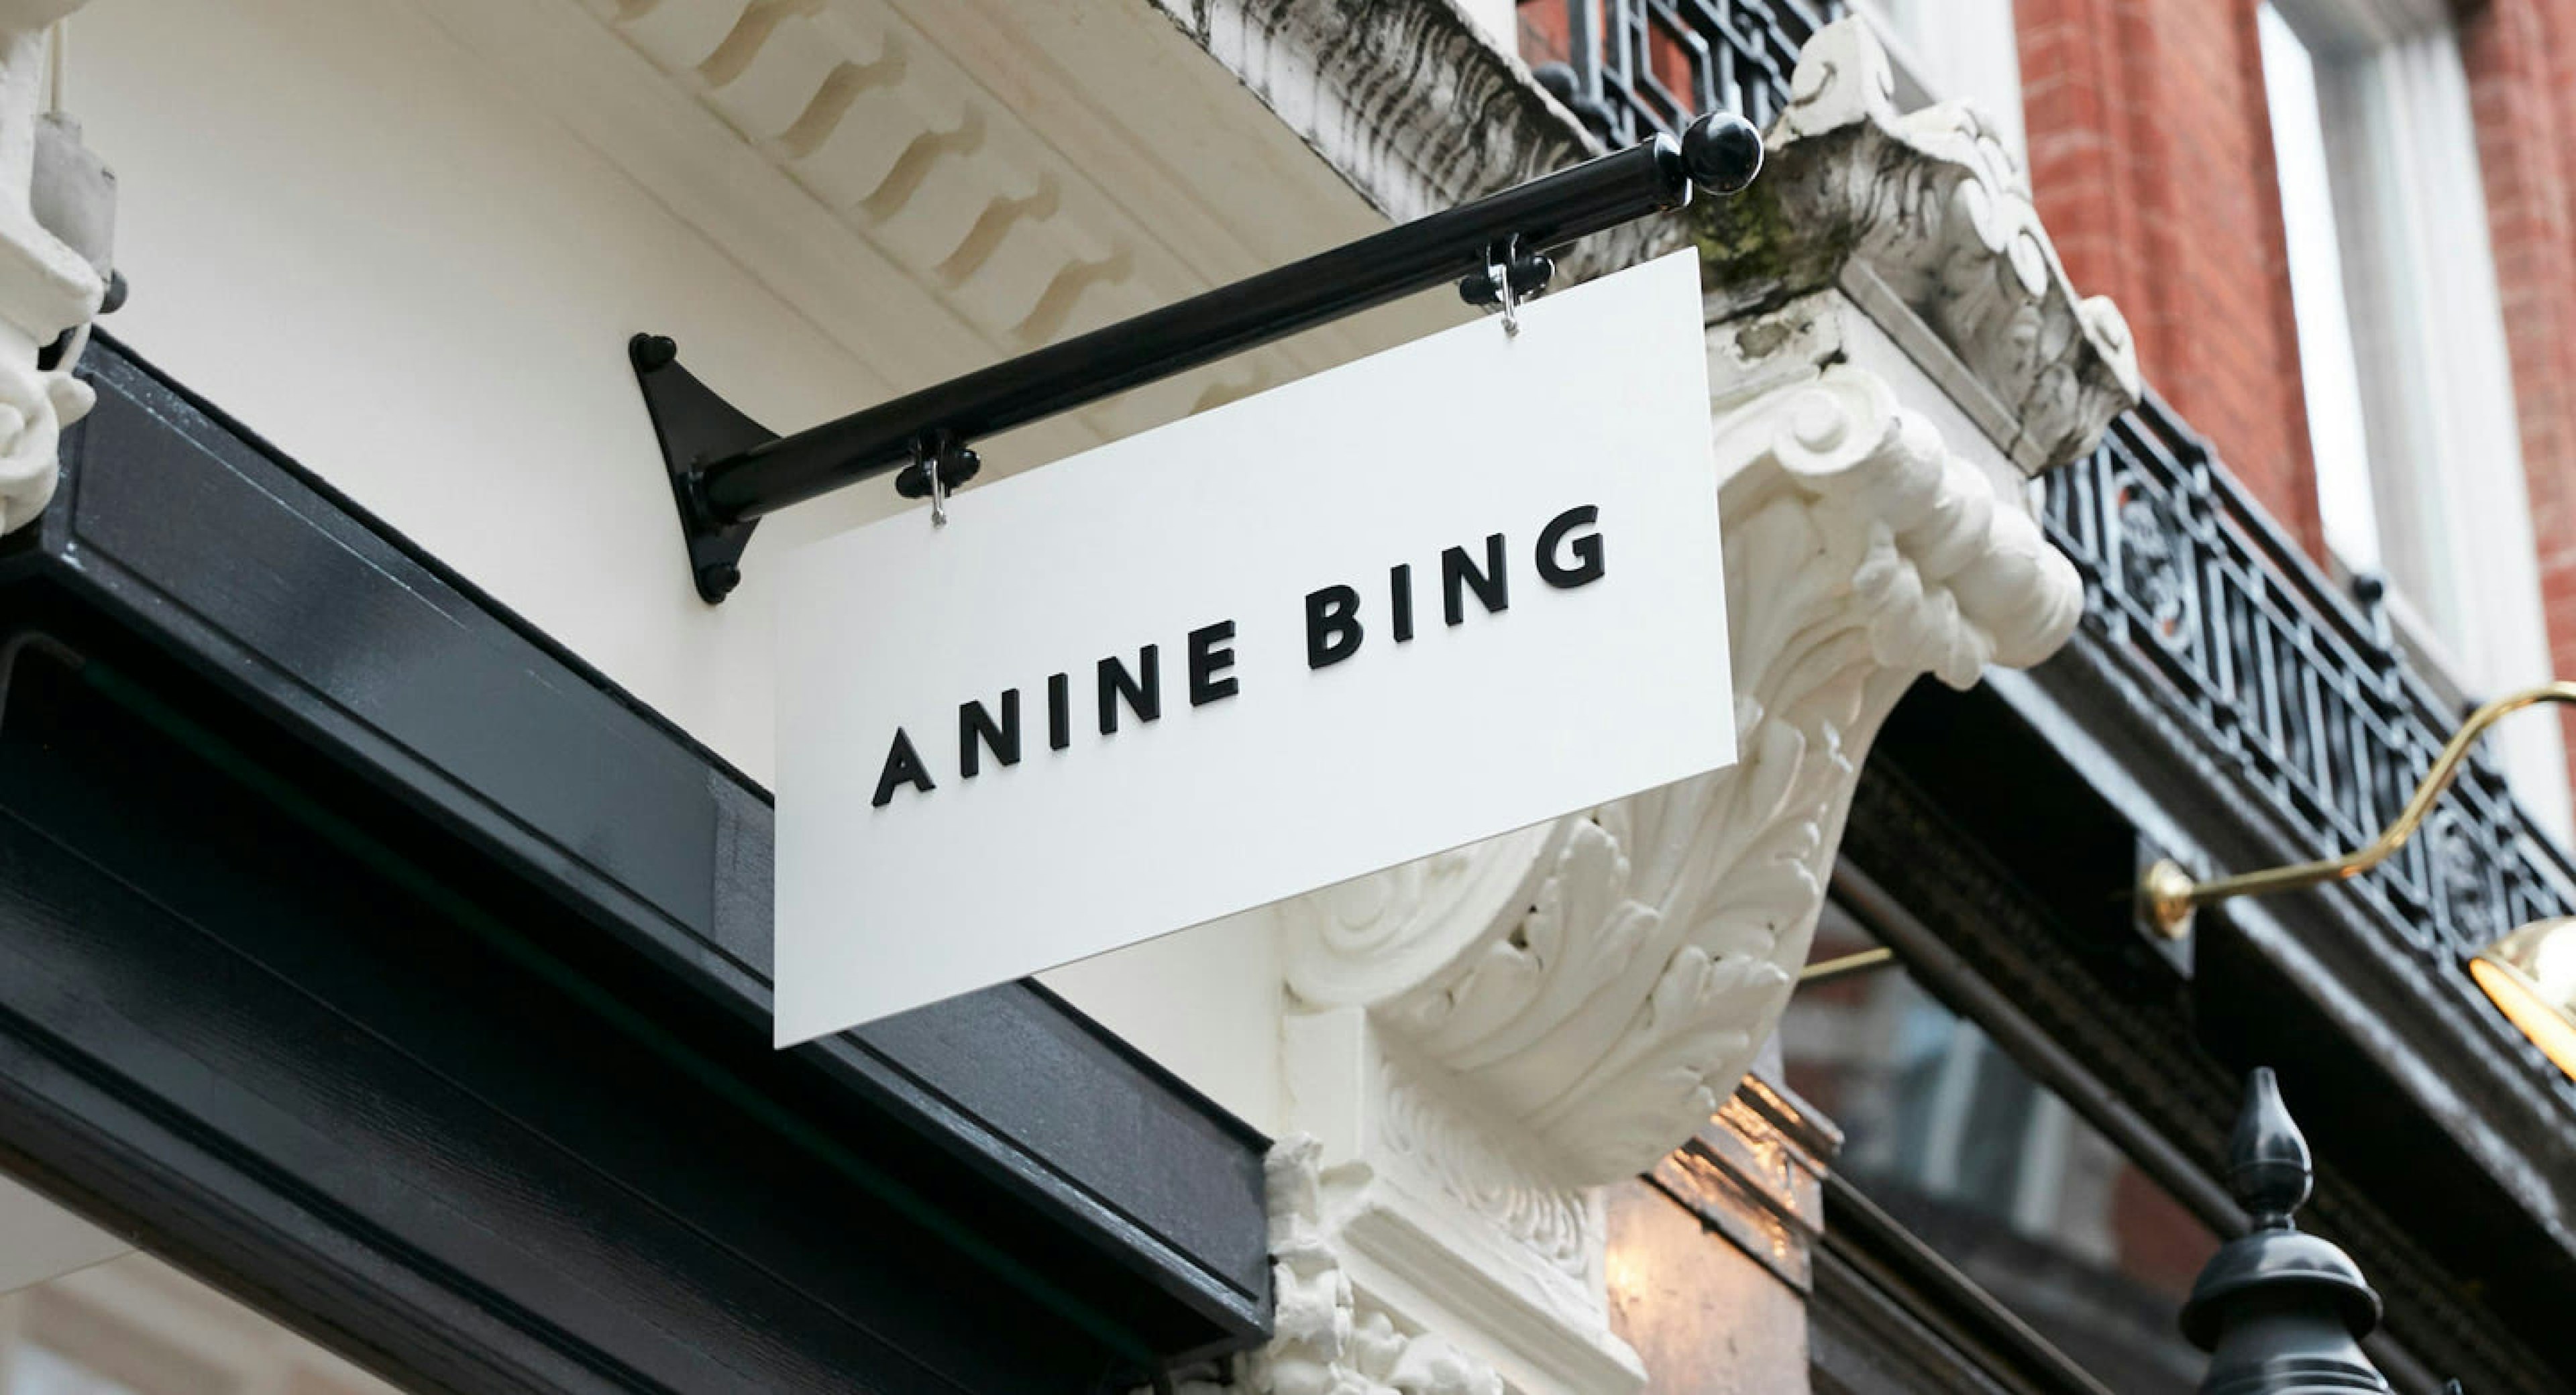 An ANINE BING store sign hanging outside the storefront on a street.